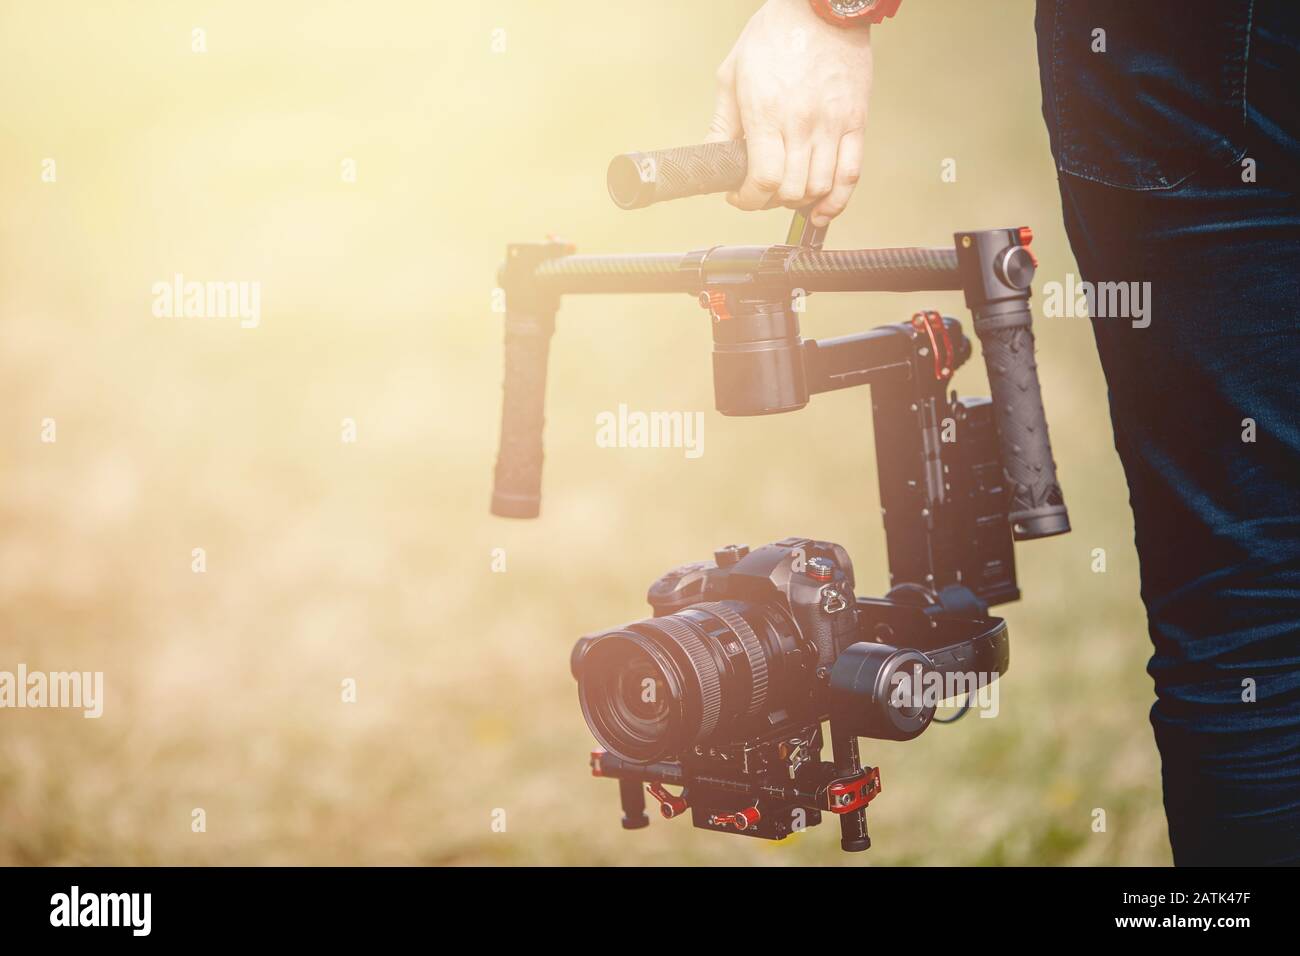 Videographer holds electronic stabilizer steadicam gimbal for DSLR camera Stock Photo